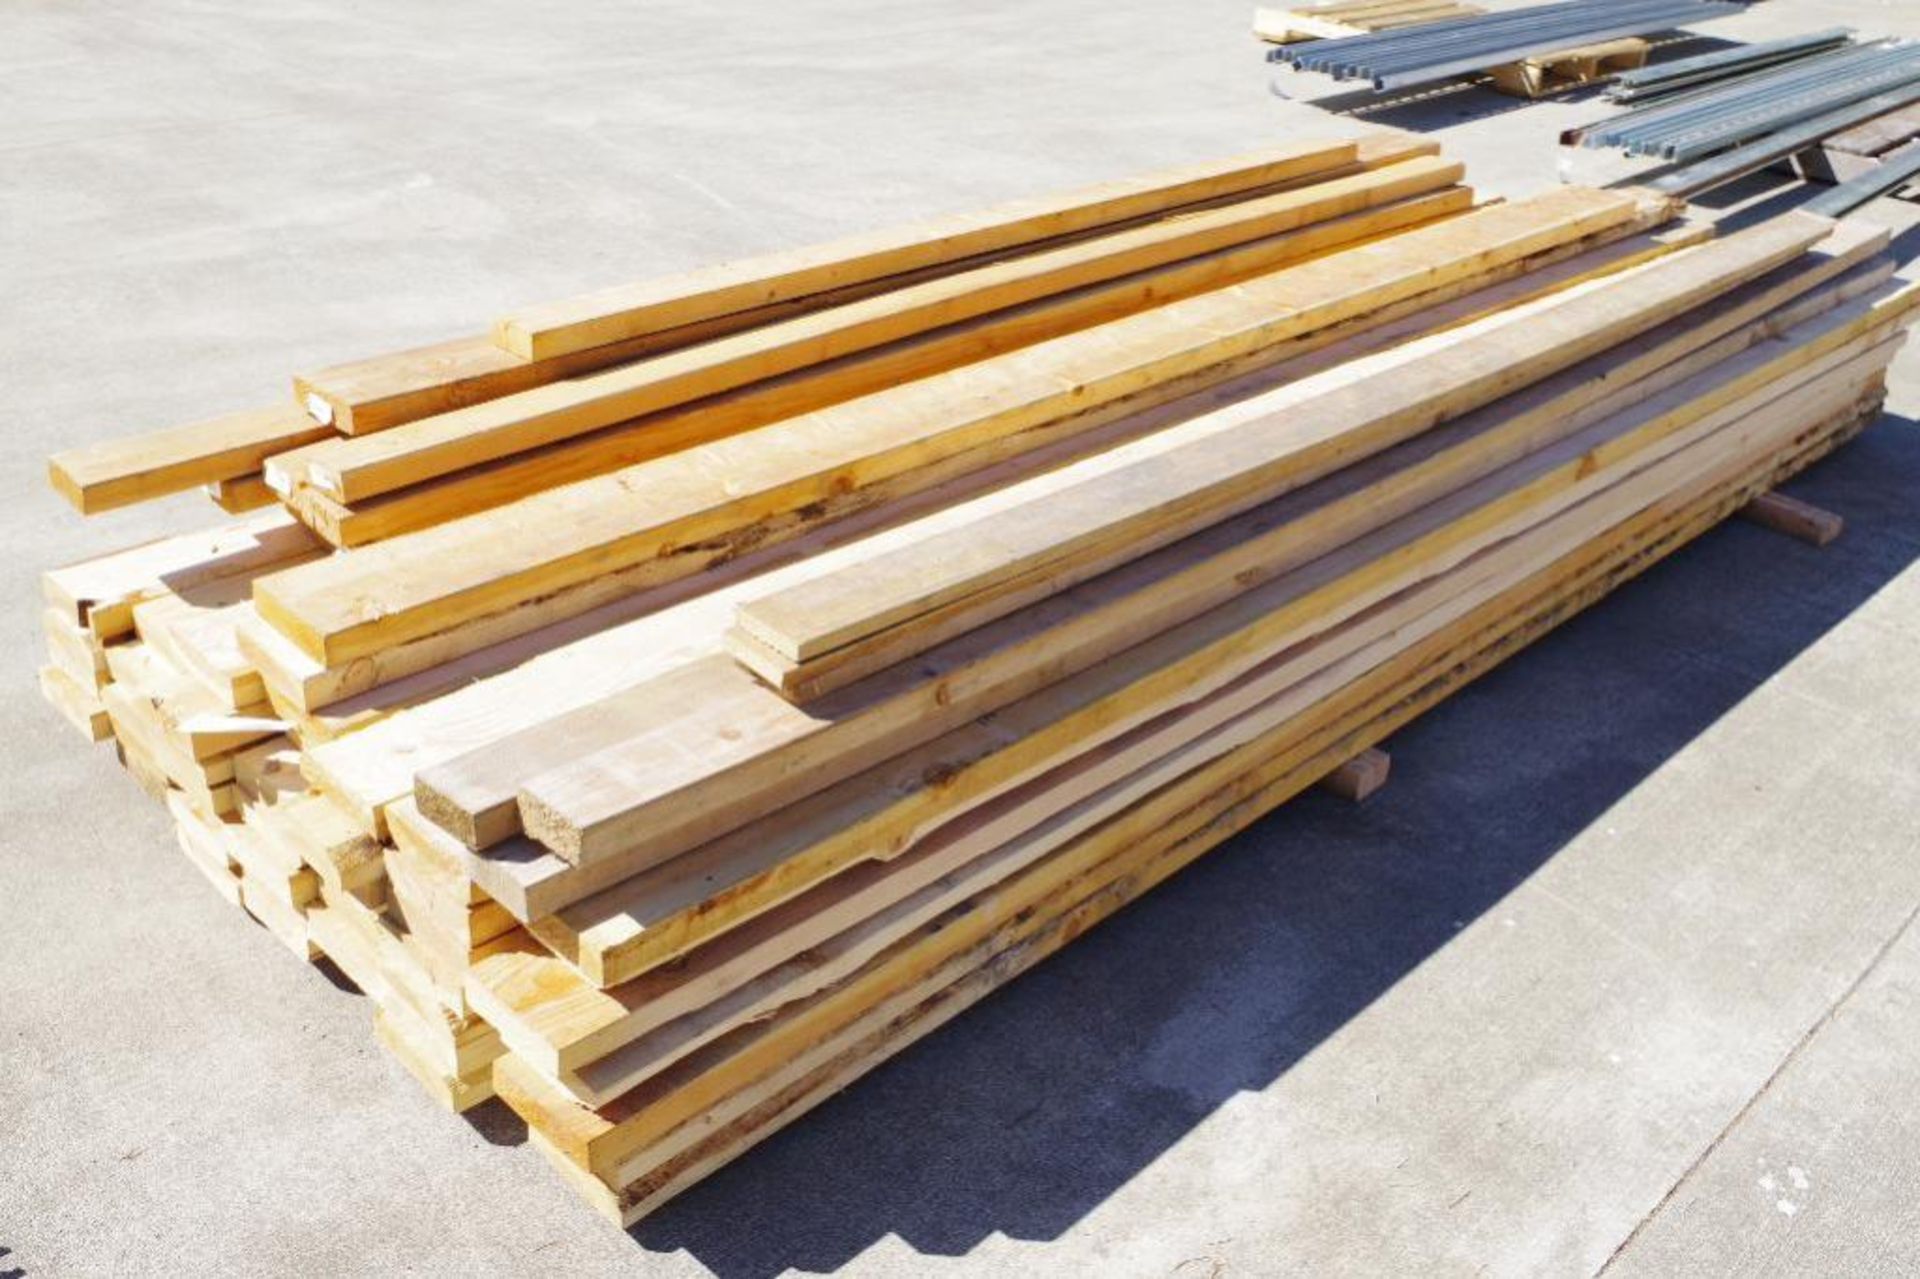 [QTY] Dimensional Lumber: Mostly 2x6 x 10'; Some 2x4 x 10' & 2x4 x 8'; Lumber has defects - Image 3 of 3